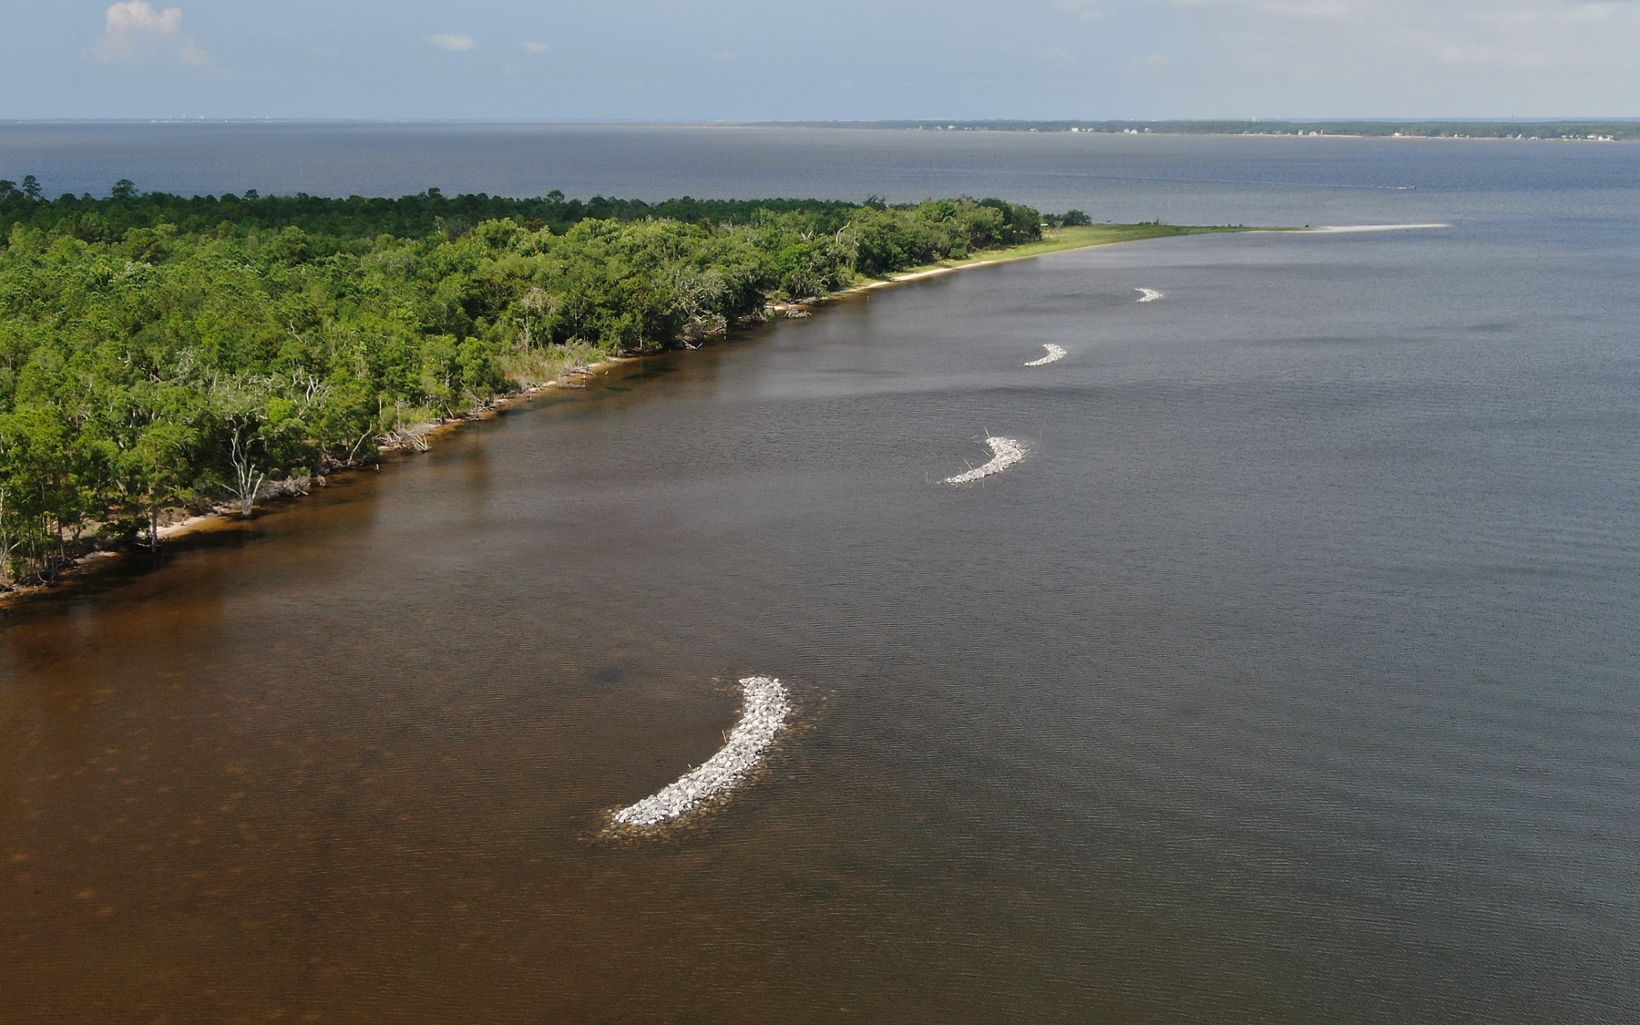 An aerial view of four oyster reefs in the water running along a tree-covered Escribano Point.